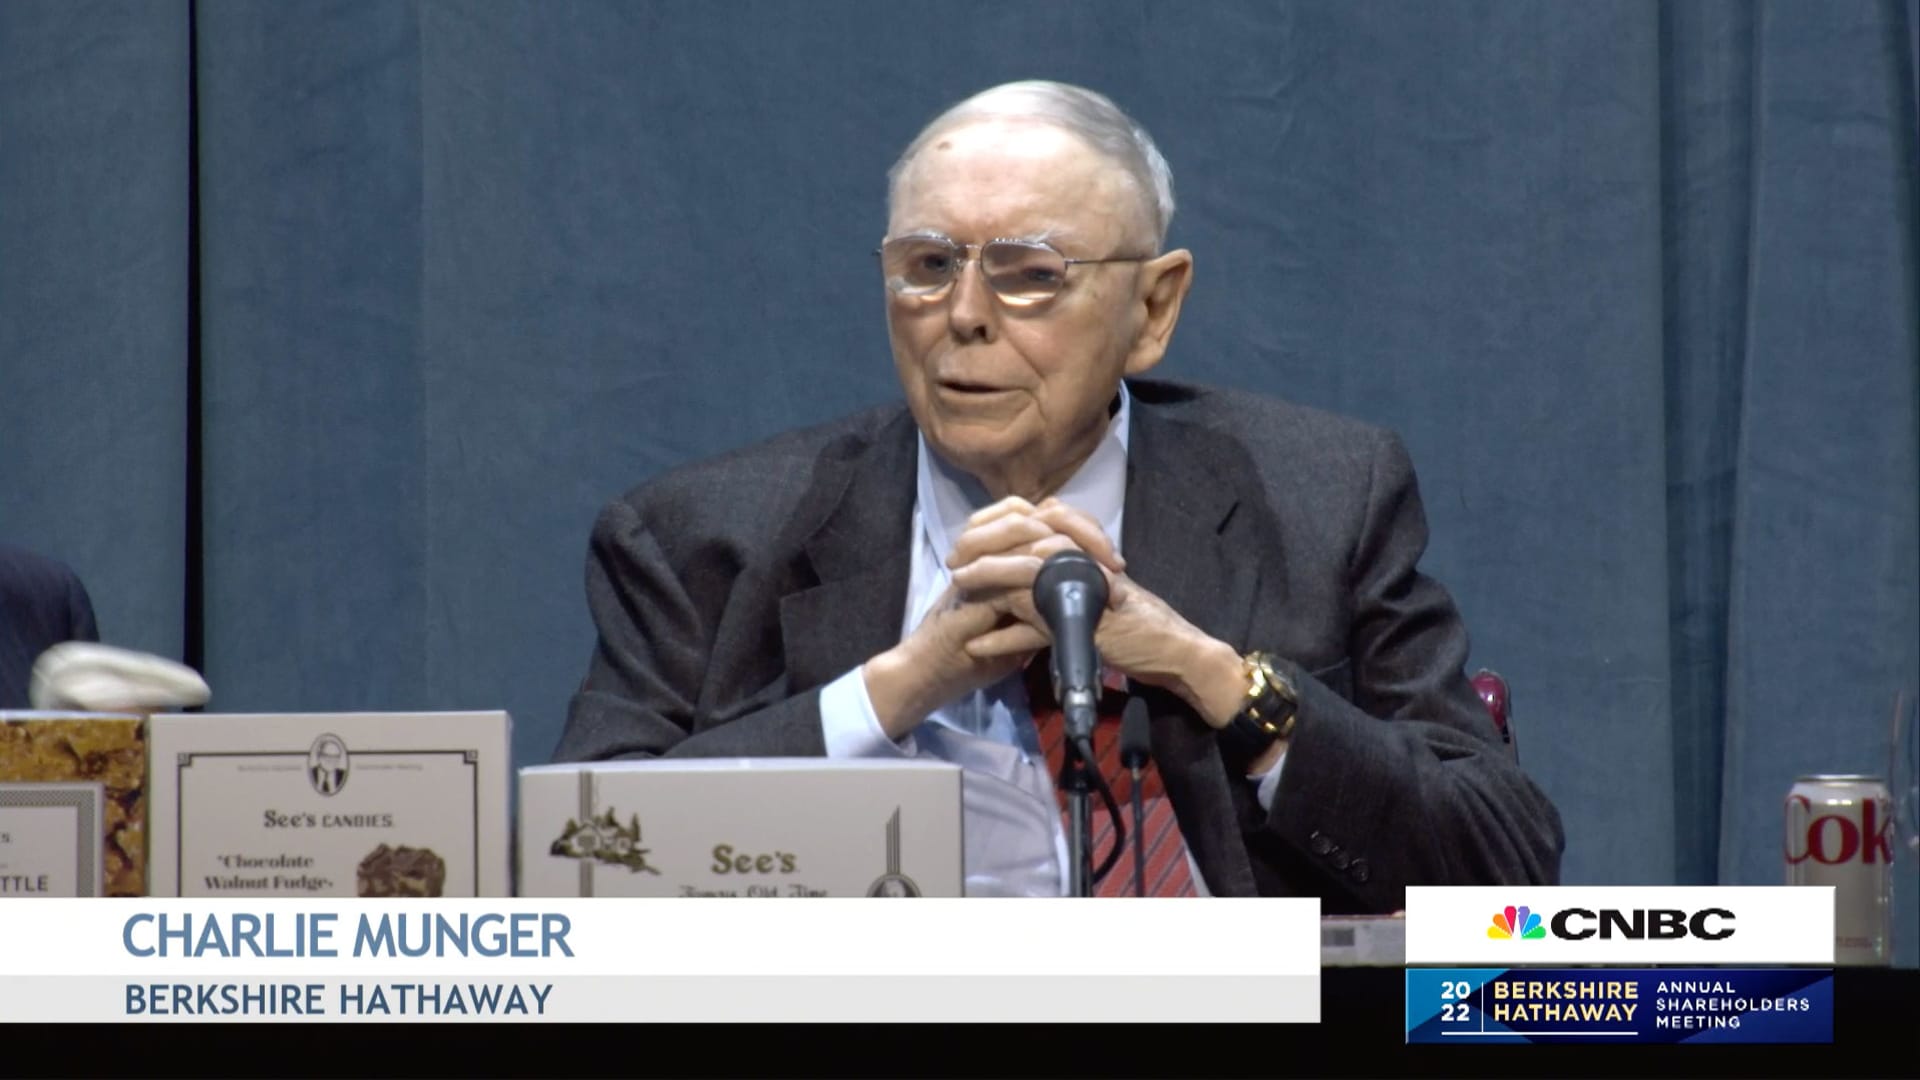 Charlie Munger believes Berkshire’s investments in fossil fuels and renewables can both work